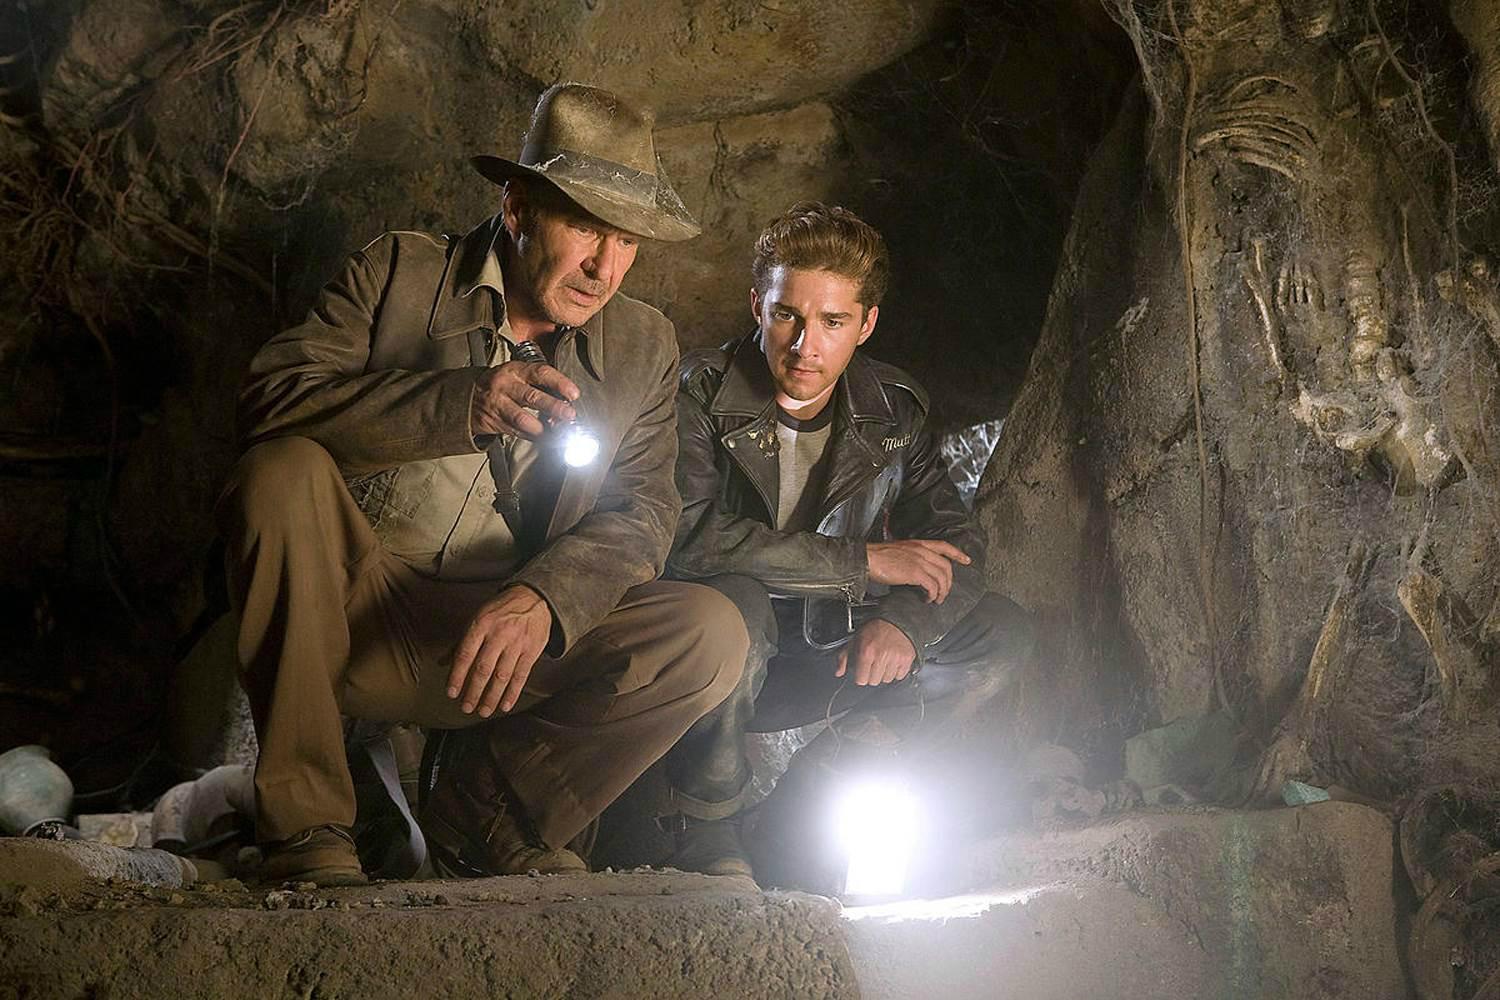 Harrison Ford (left) and Shia LaBeouf in ‘Indiana Jones and the Kingdom of the Crystal Skull’